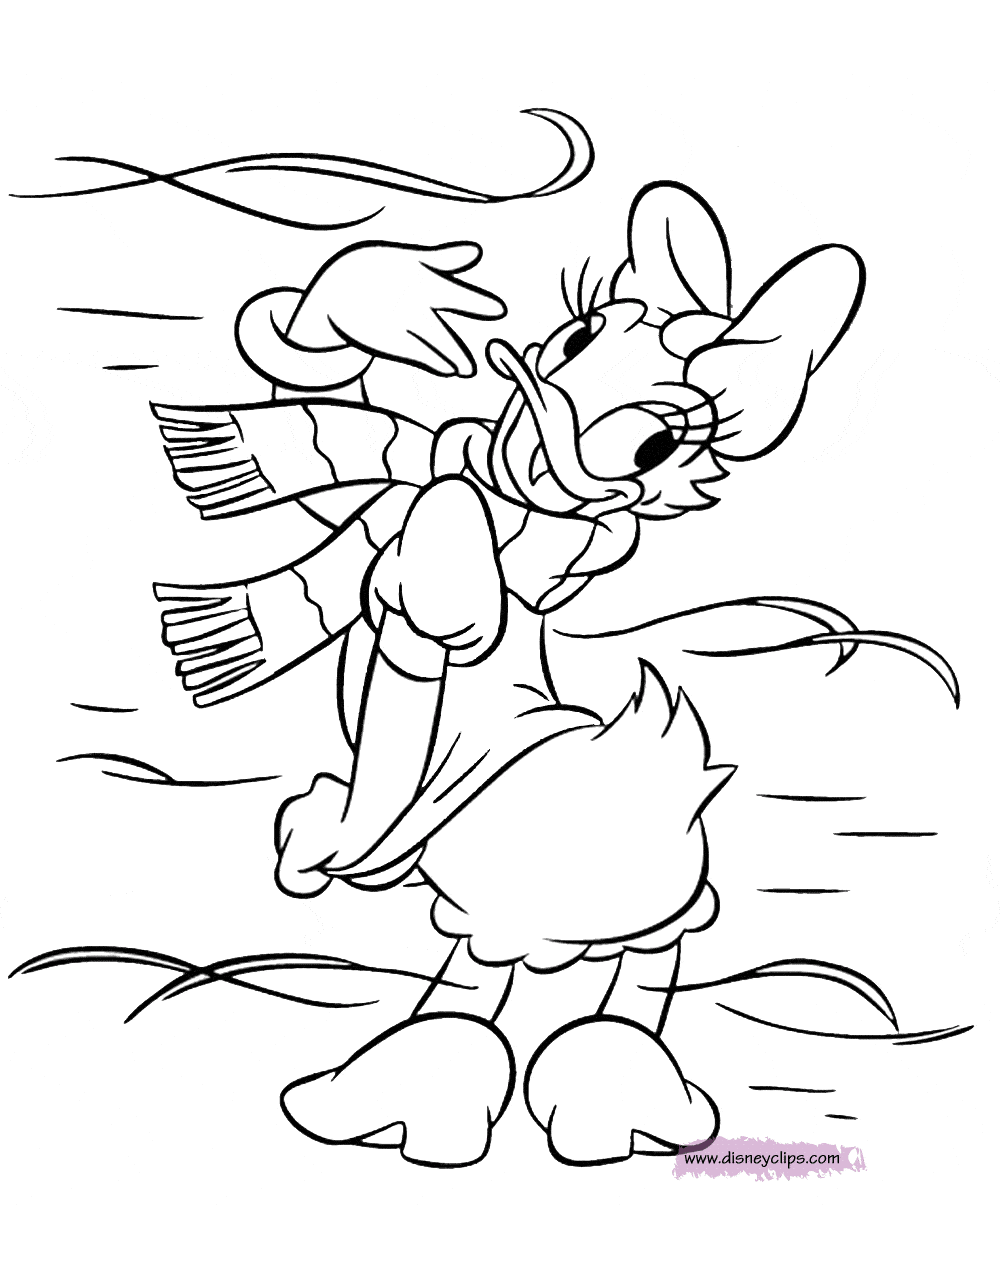 donald and daisy coloring pages donald duck and daisy duck coloring pages hellokidscom donald and coloring daisy pages 